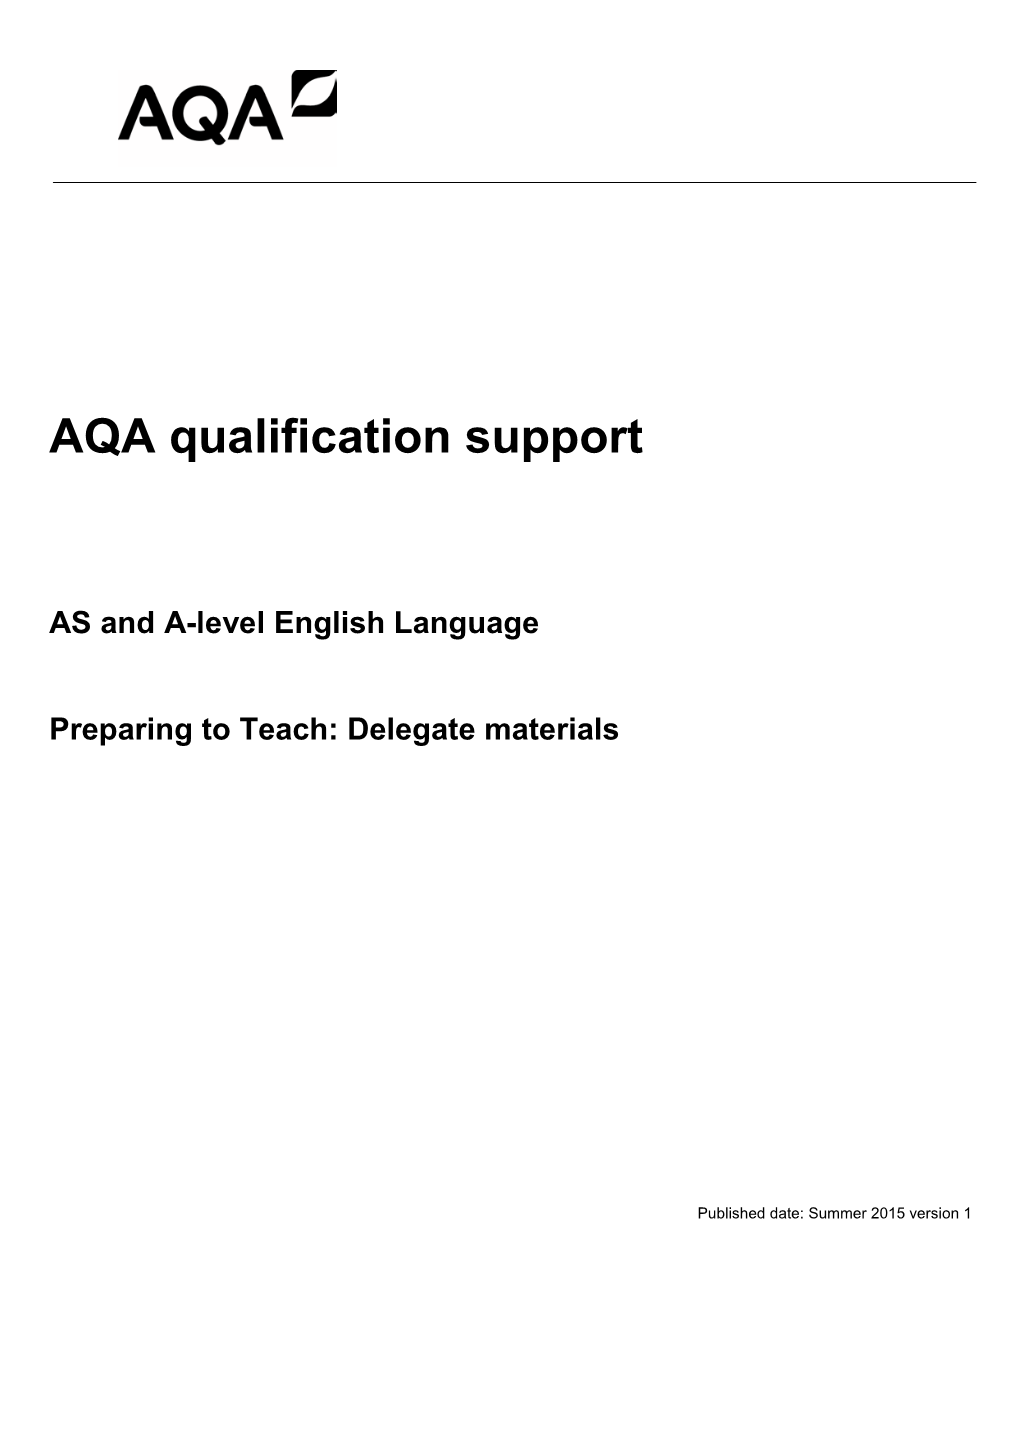 as-and-a-level-english-language-resources-preparing-to-teach-docslib